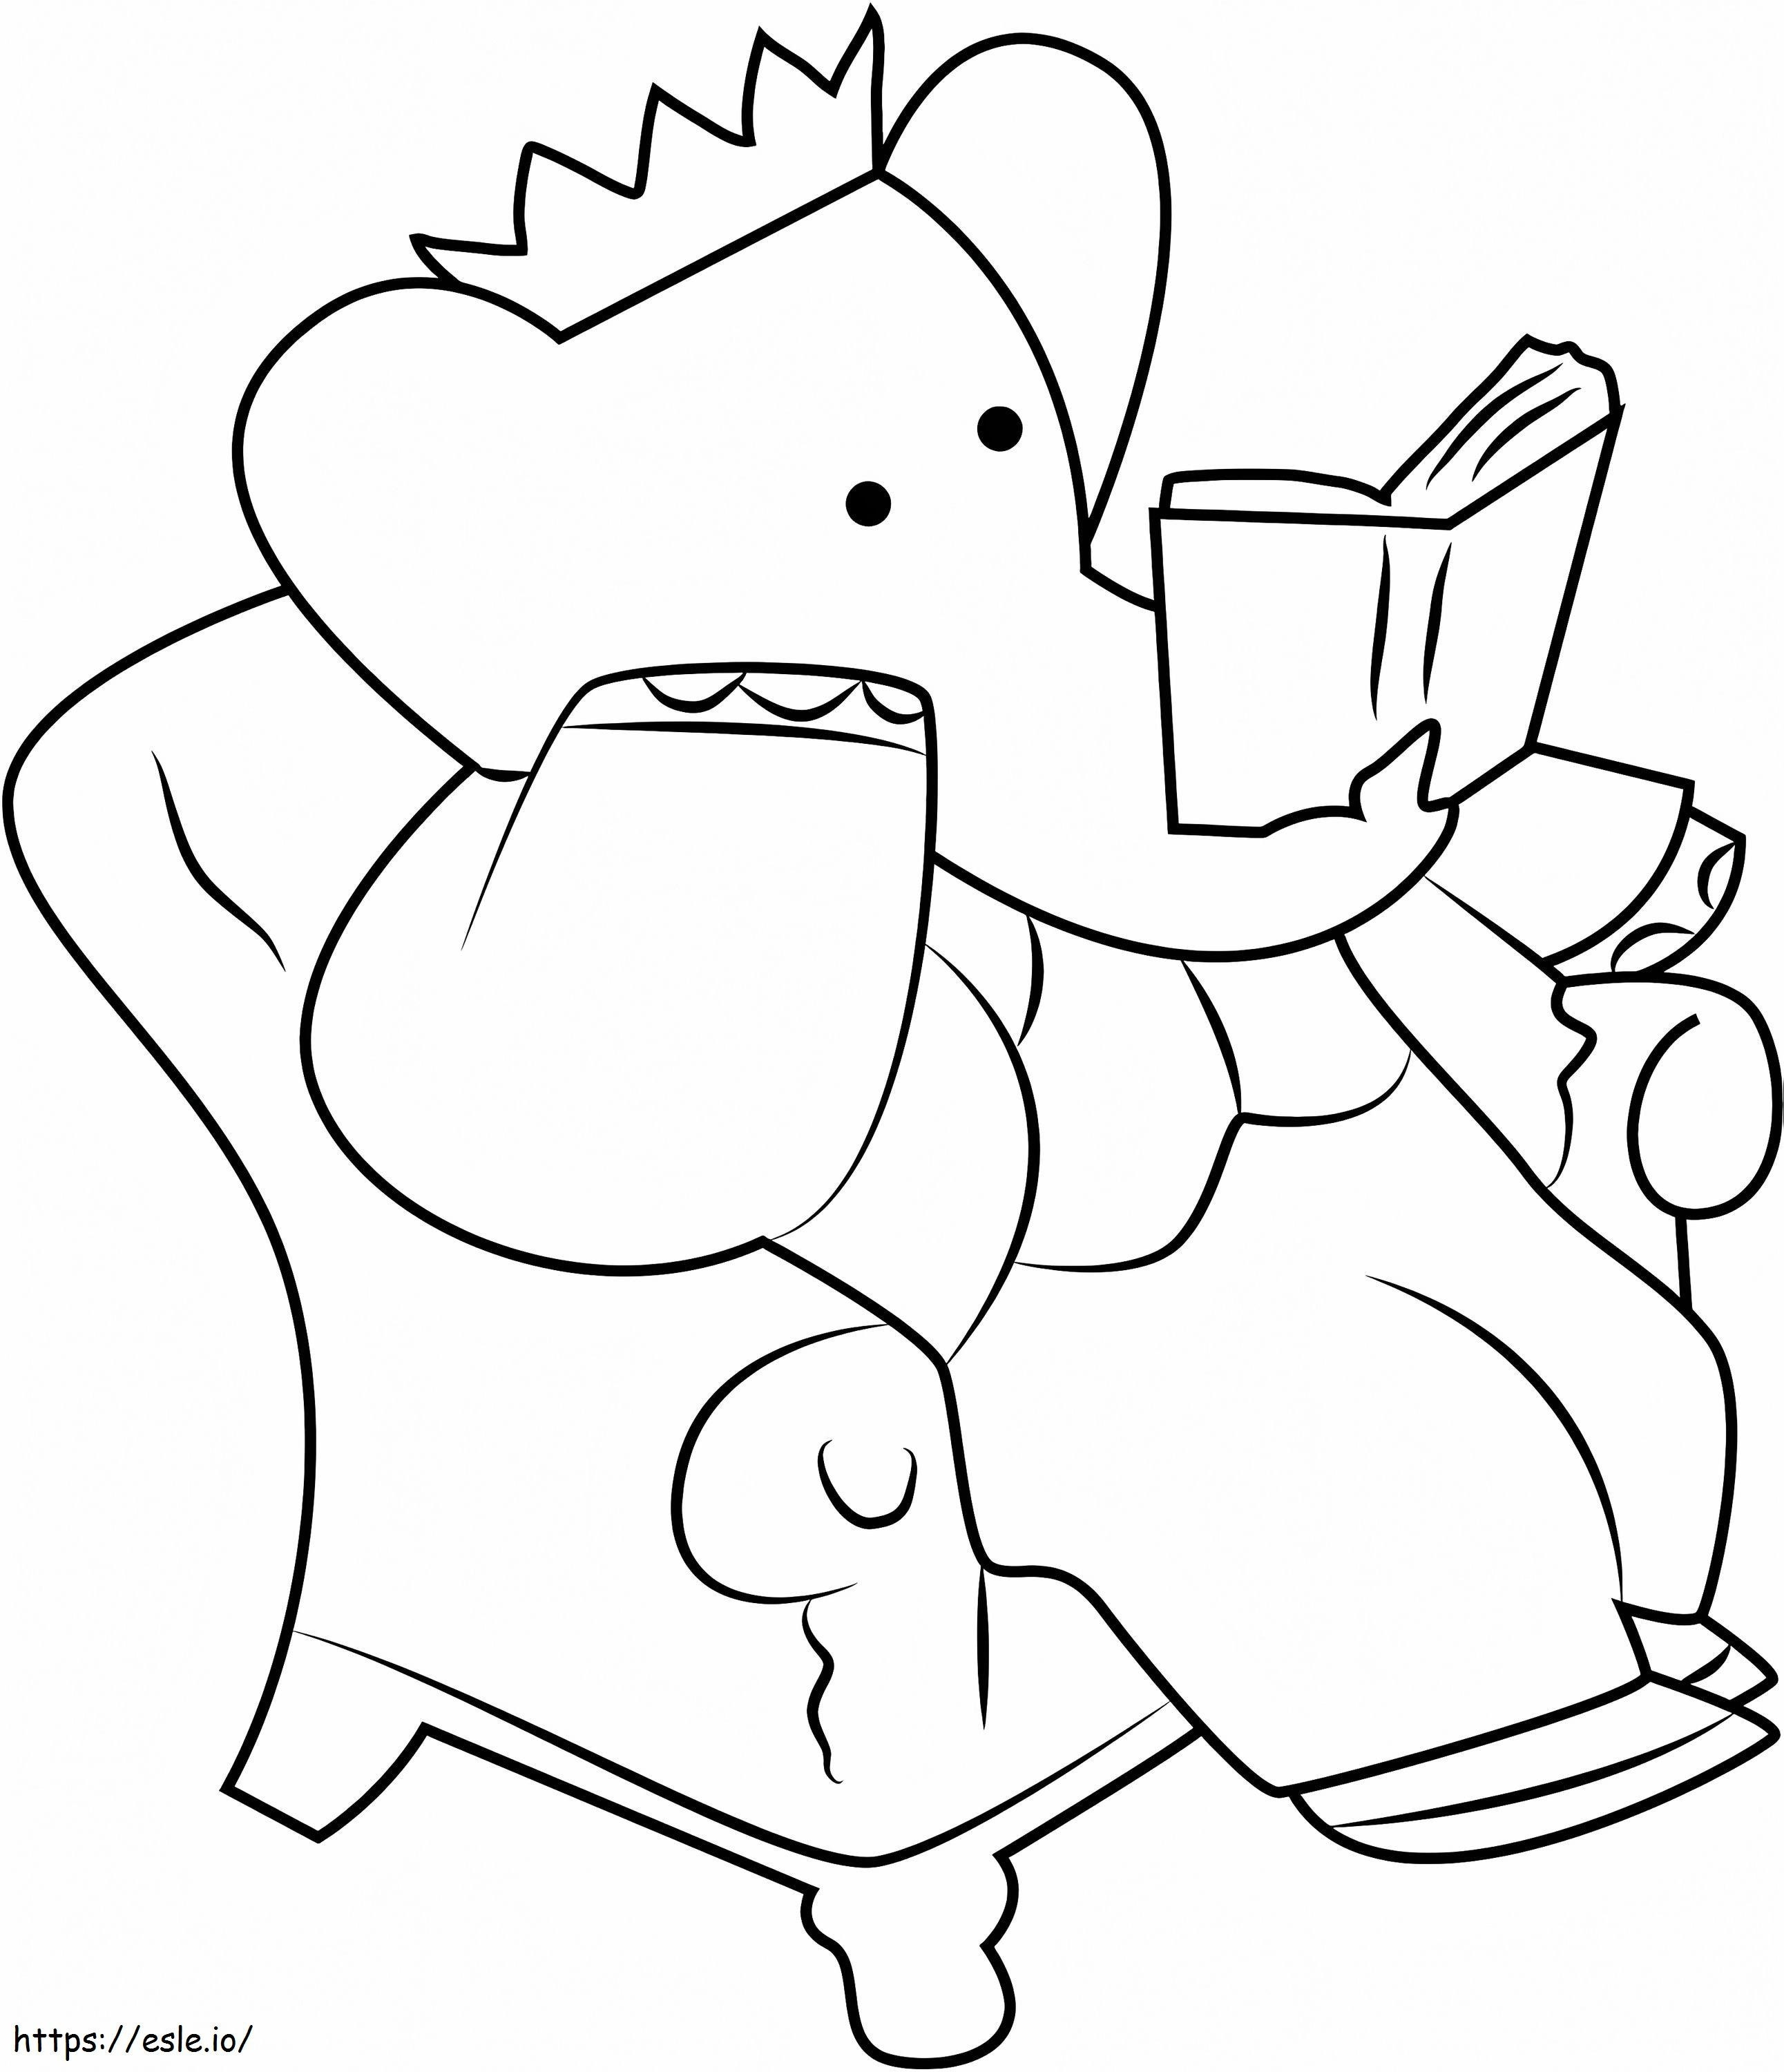 1531188853 Babar Reading Book A4 coloring page